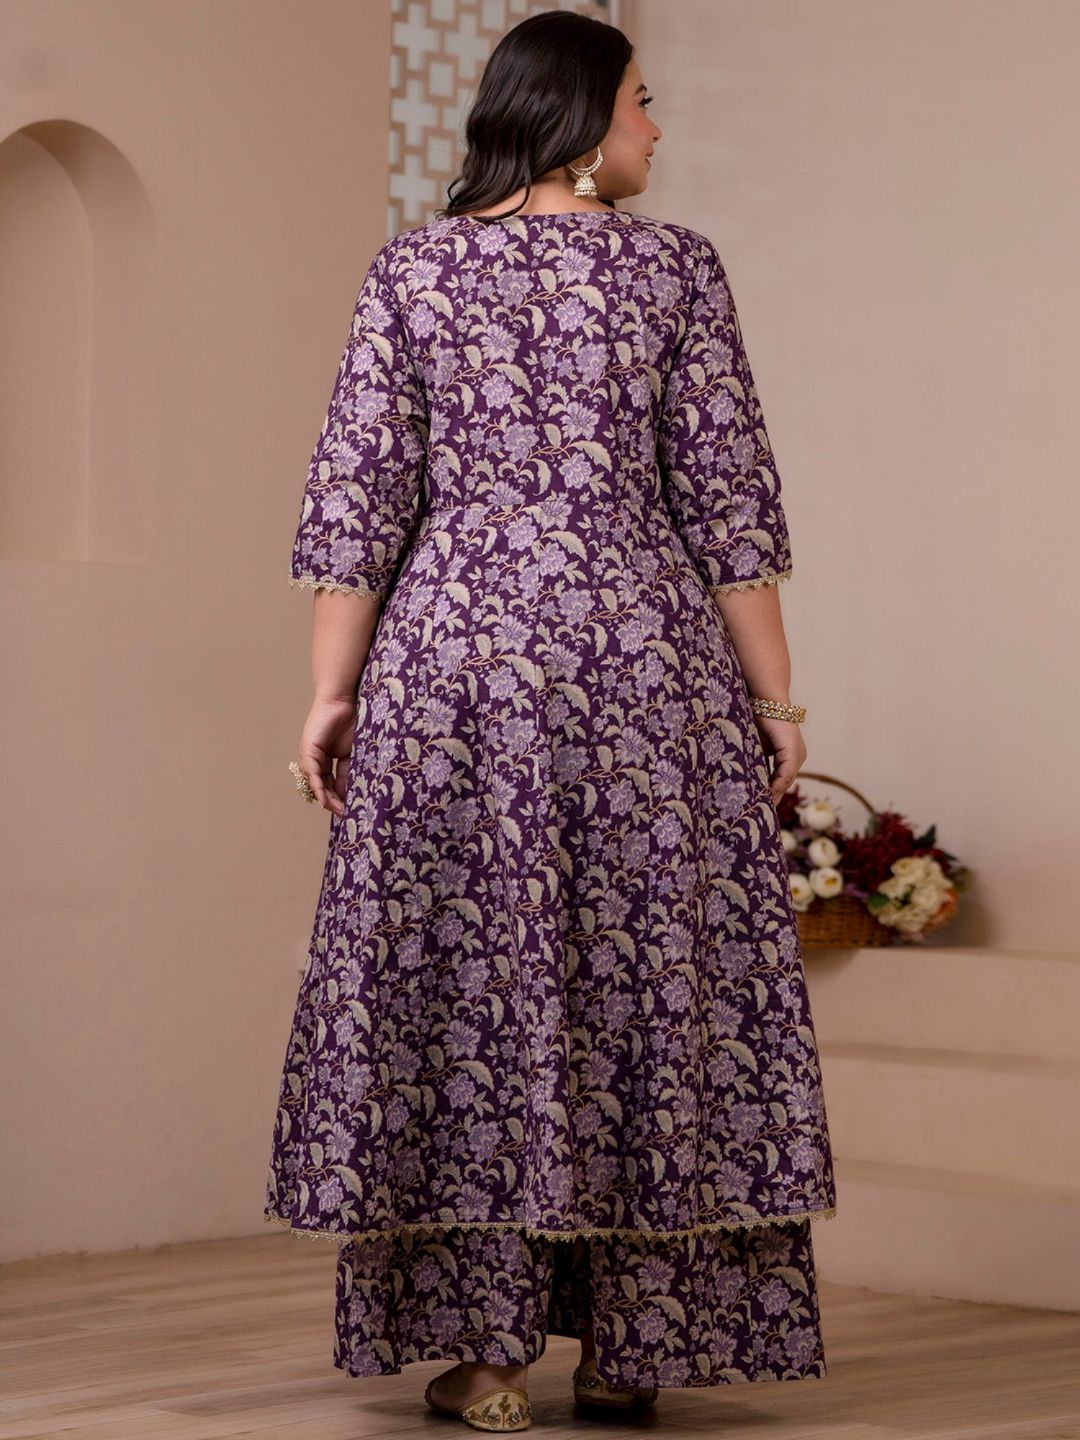 Voilet Cotton Floral Printed Kurta with Palazzo and Dupatta